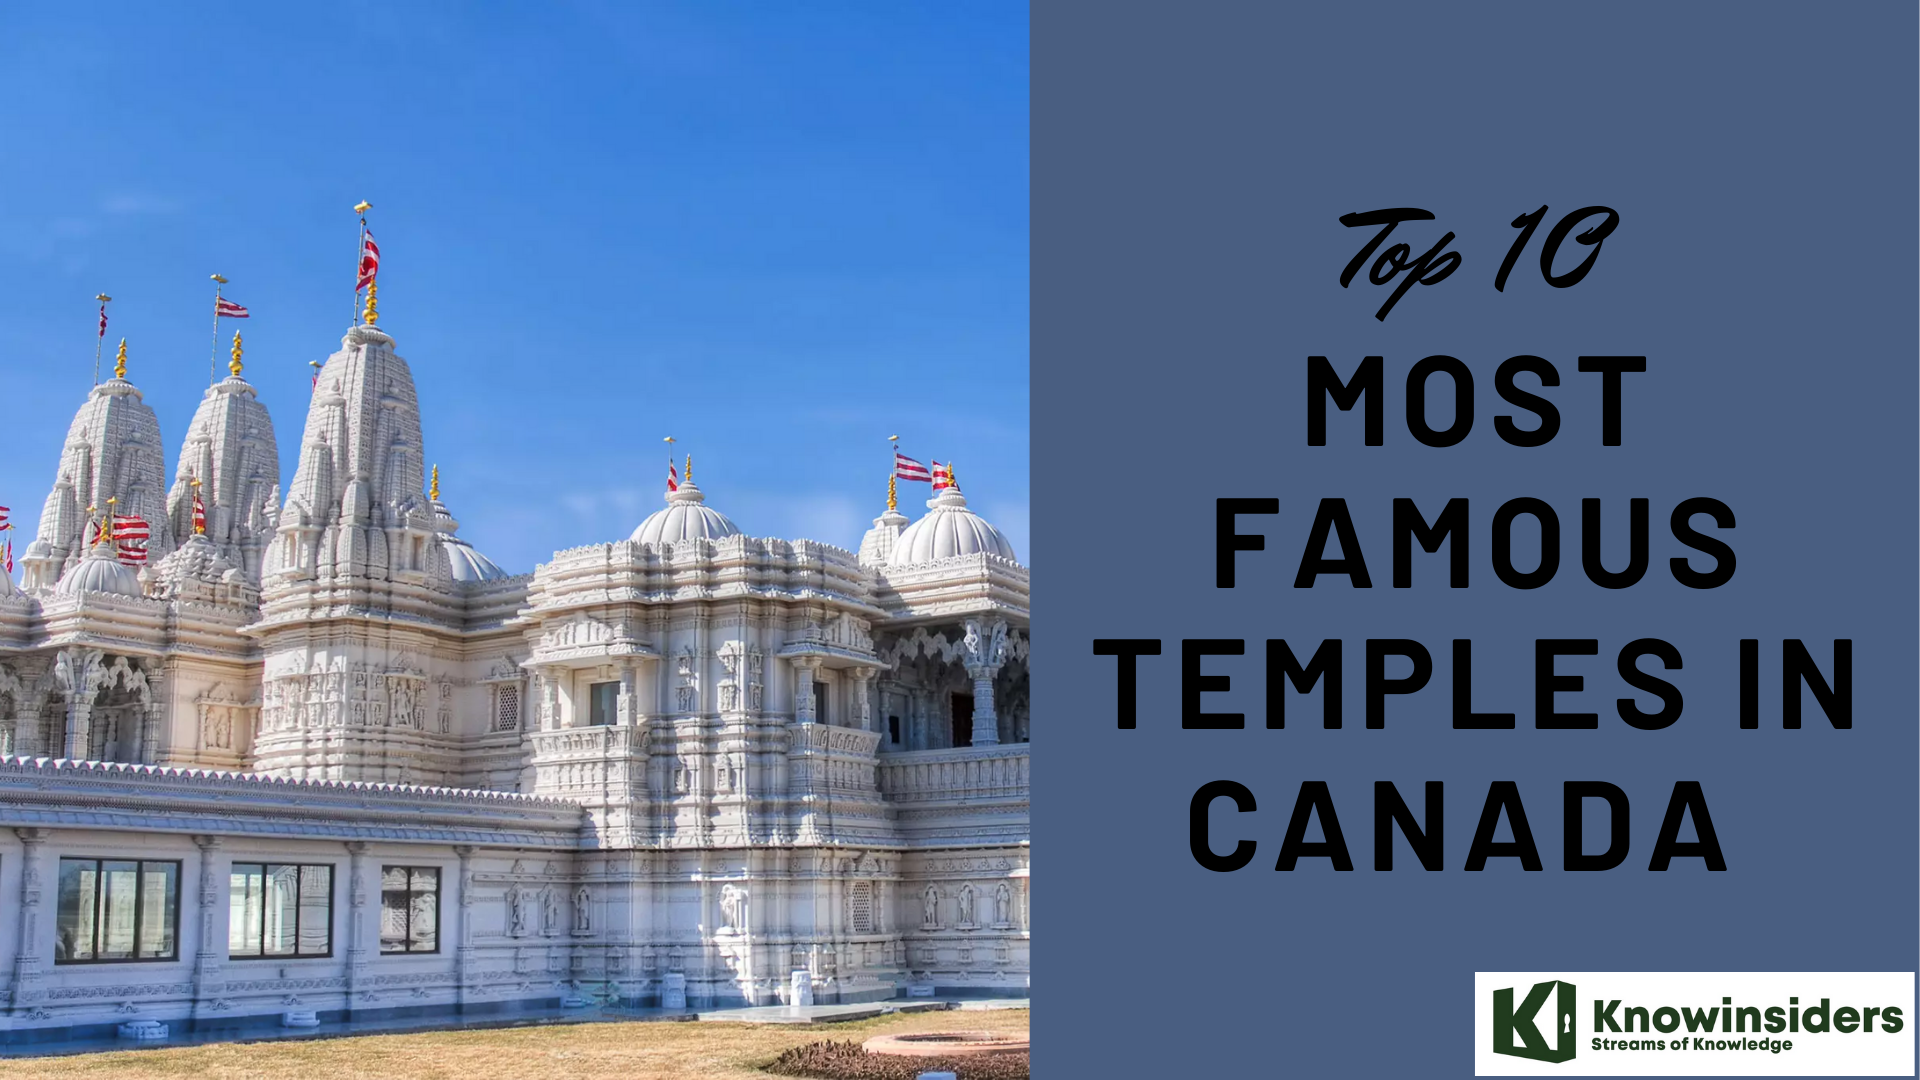 Top 10 most famous temples in Canada